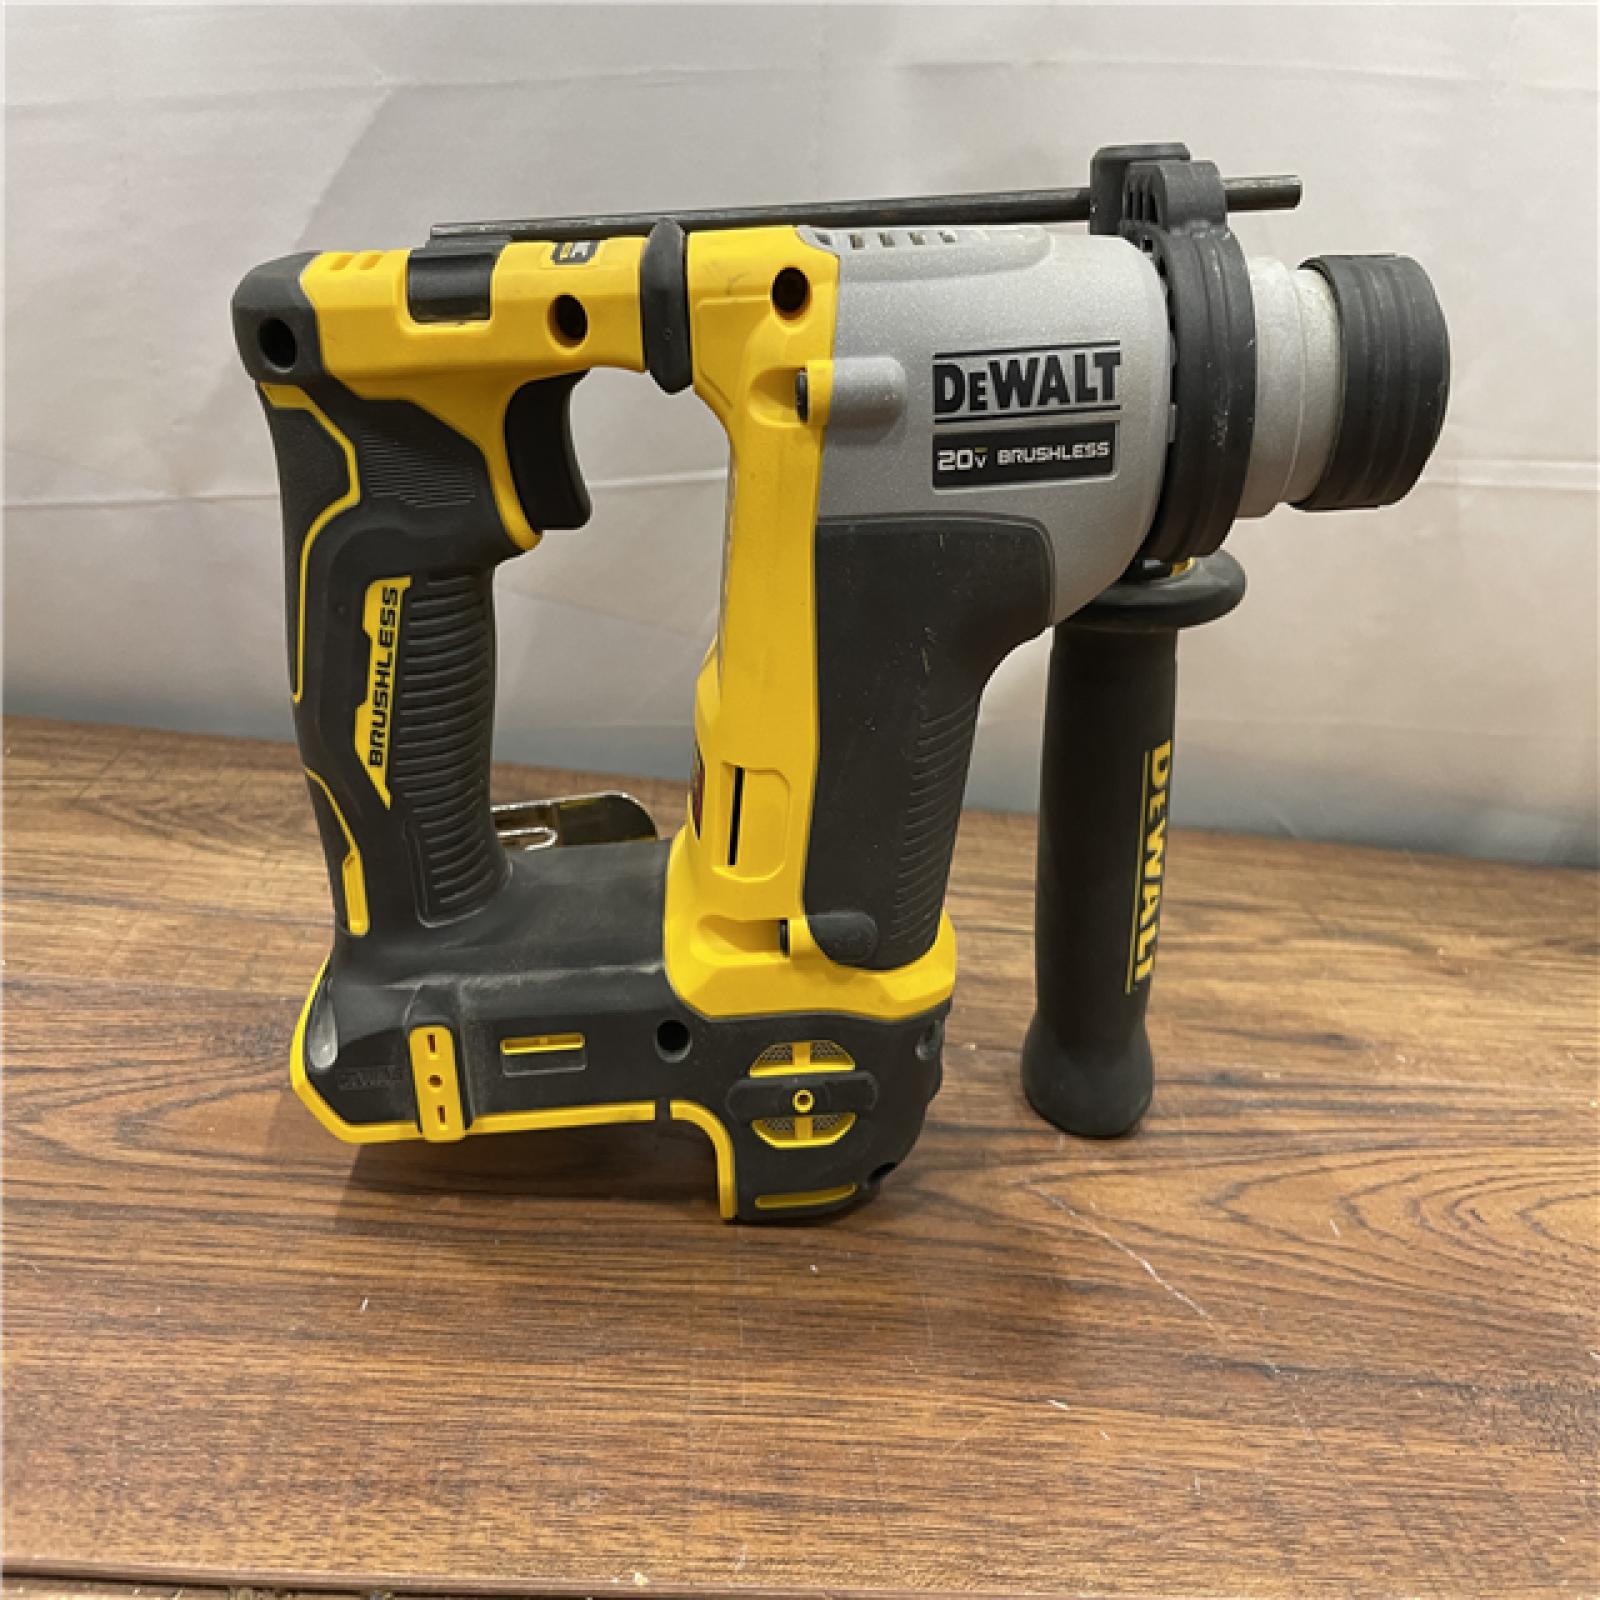 AS-IS Dewalt DCH172B MAX Atomic 20V 5/8 Inch Brushless Cordless SDS Plus Rotary Hammer (Tool Only)